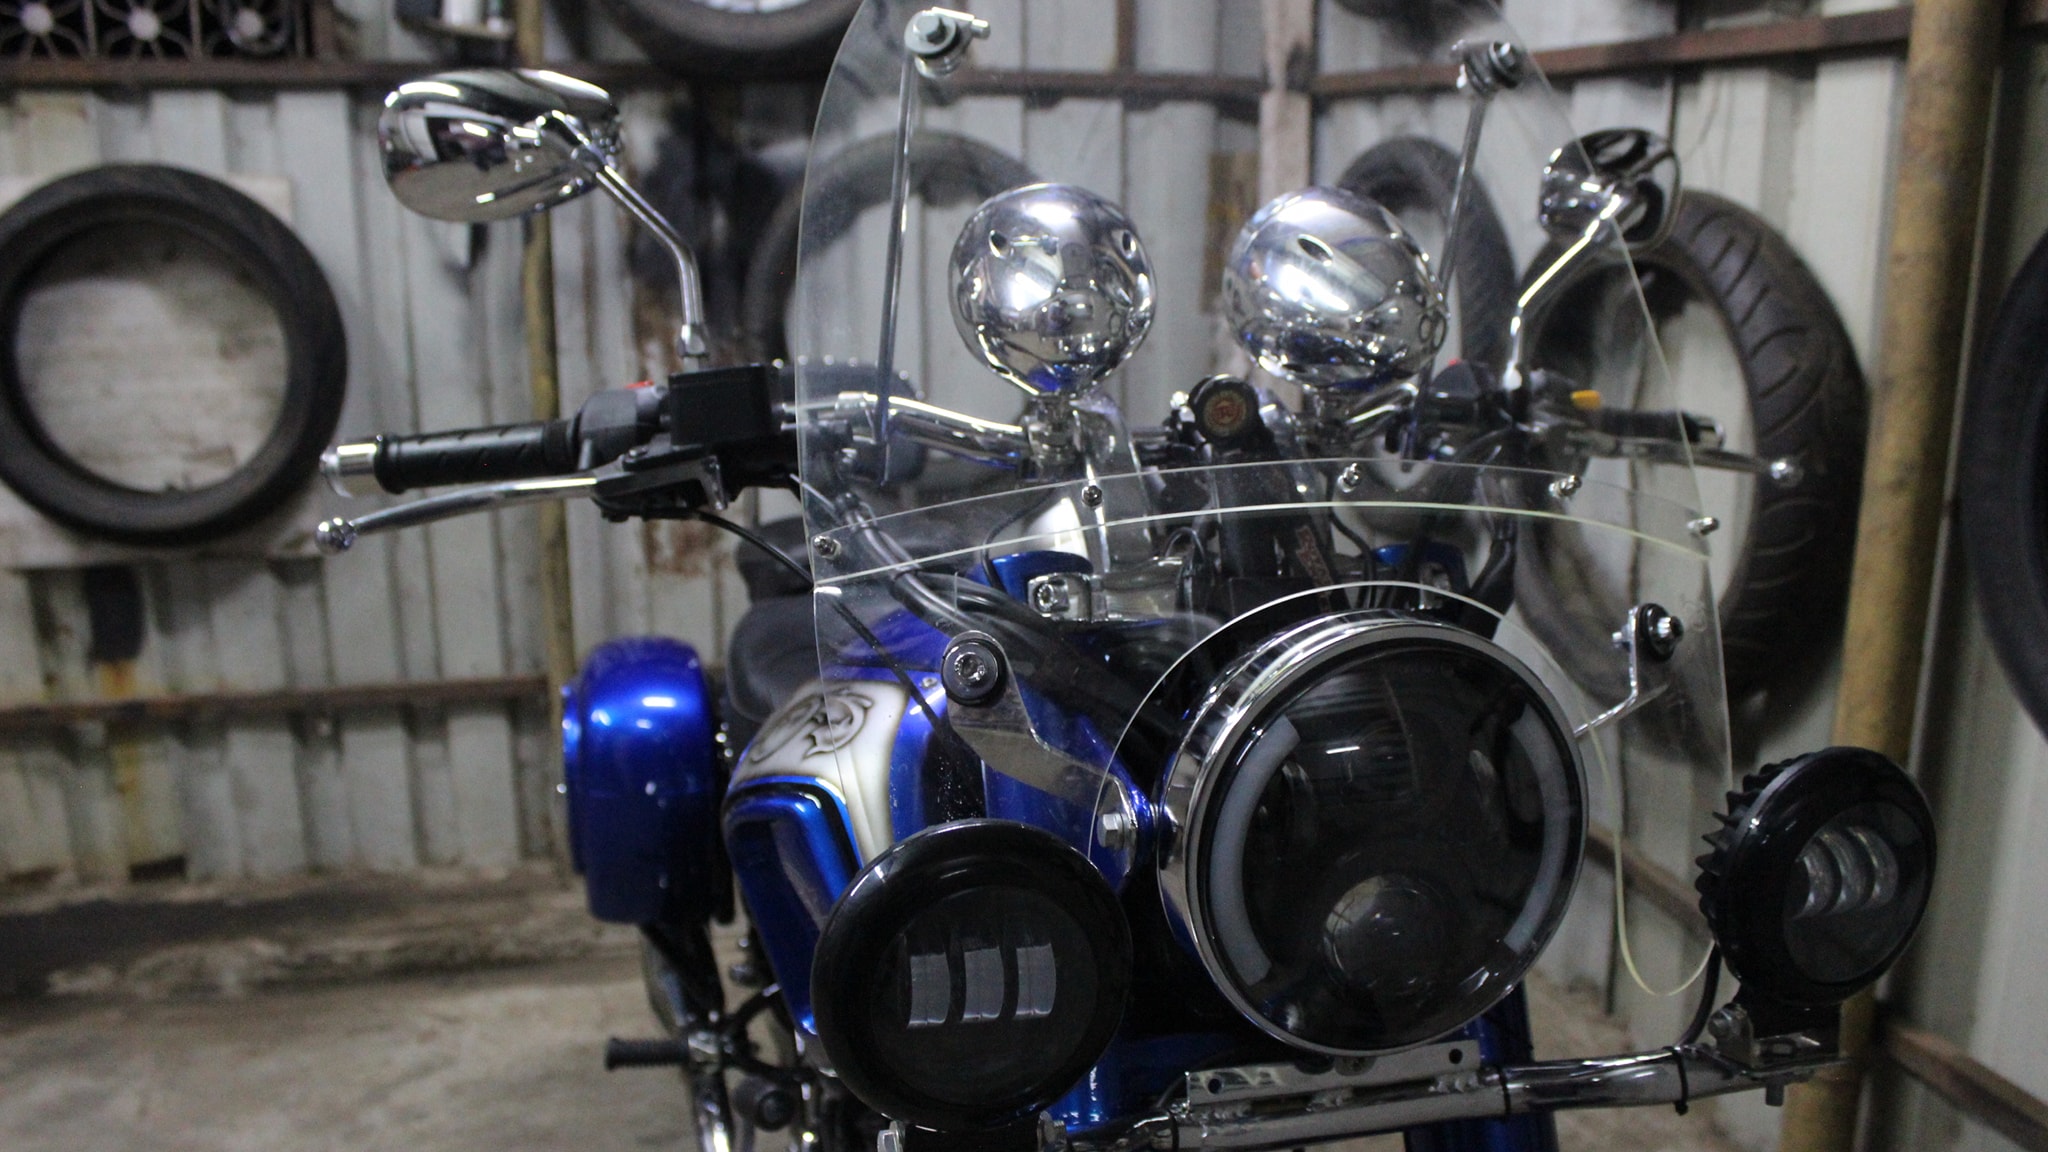 This Royal Enfield Bike is Equipped with Bluetooth Speakers & Dual Exhausts - frame